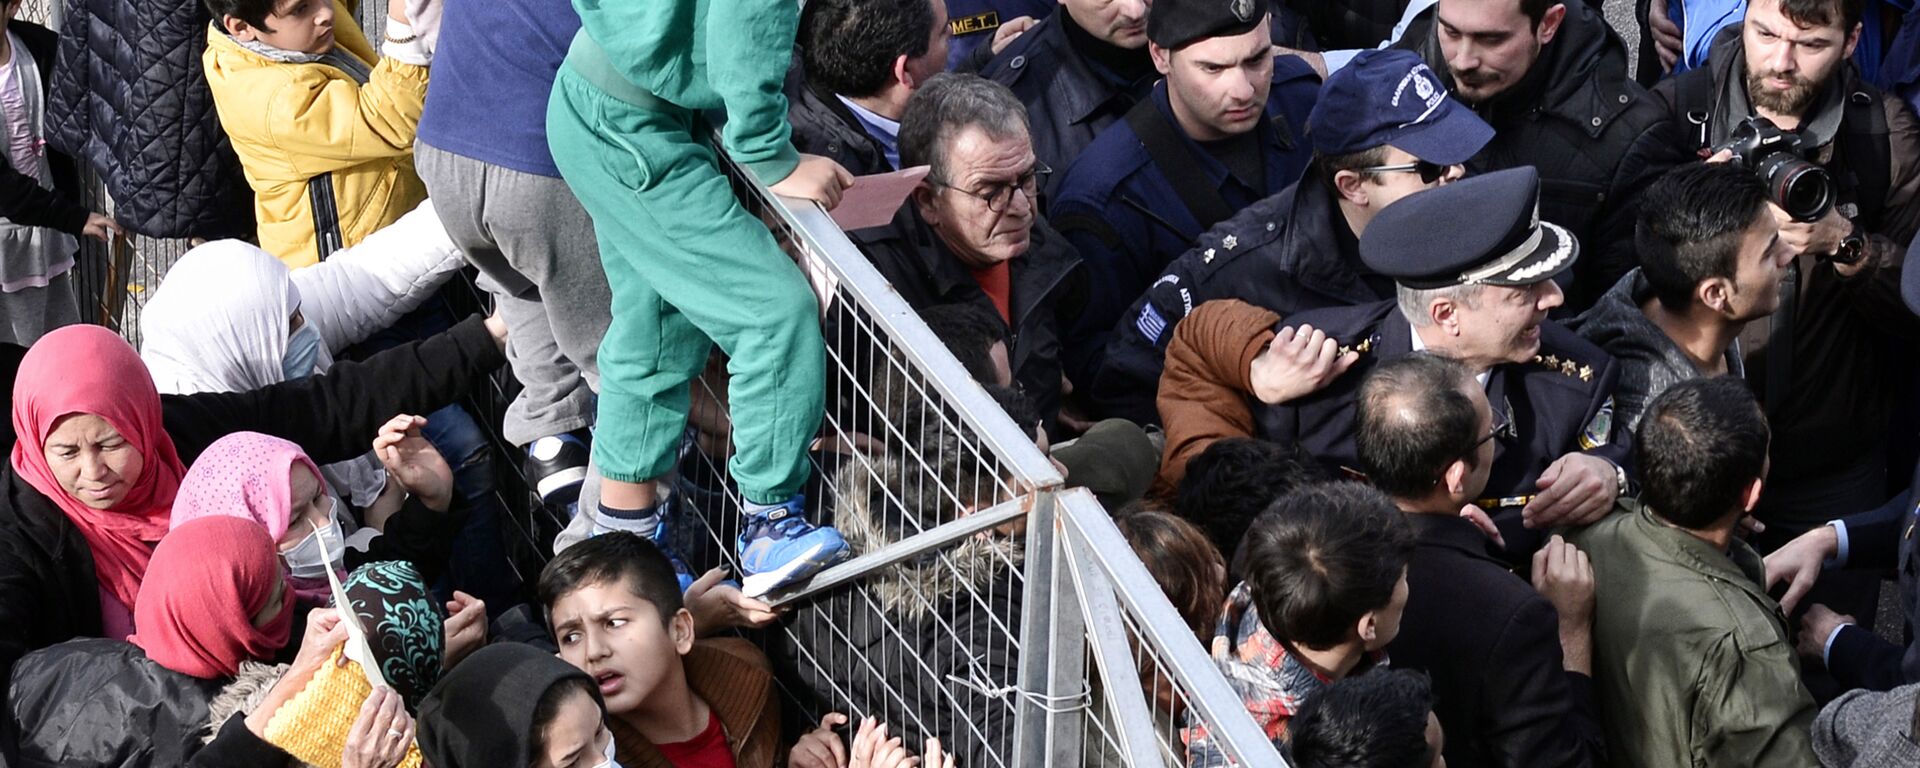 Migrants block the entrance of the Hellinikon camp in Athens in protest at poor living conditions on February 6, 2017 - Sputnik International, 1920, 19.08.2021